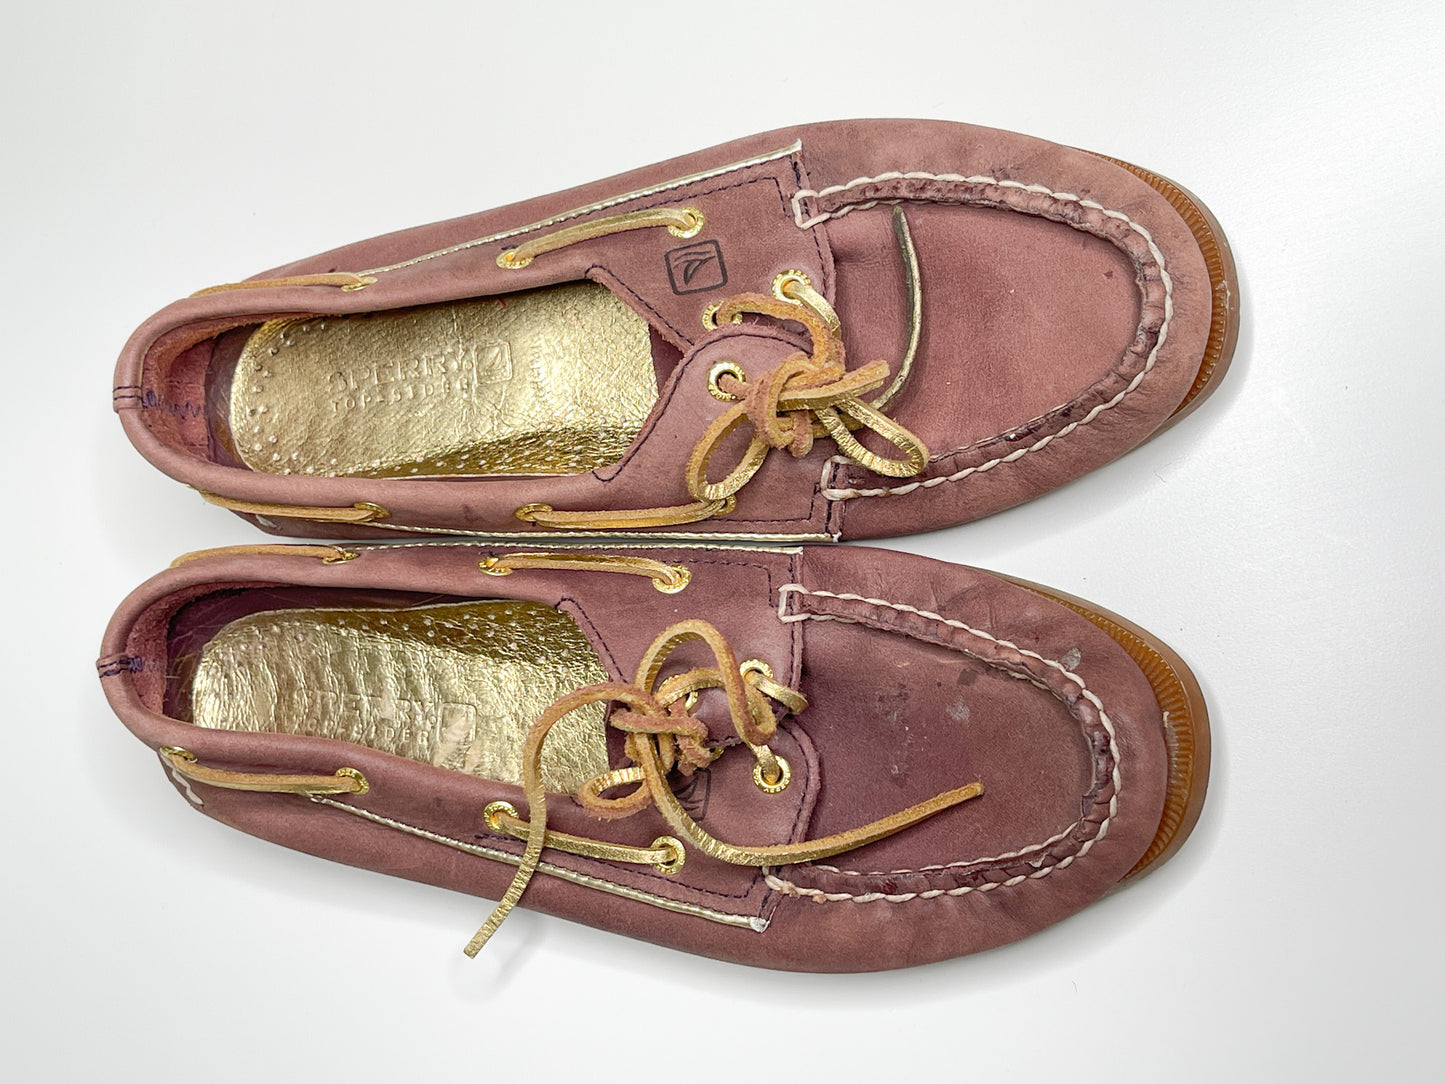 Vintage SPERRY Top-Sider Boating Shoes | Non- Slip Non- Marking Boat Shoes| Women's Shoes| Size 8M